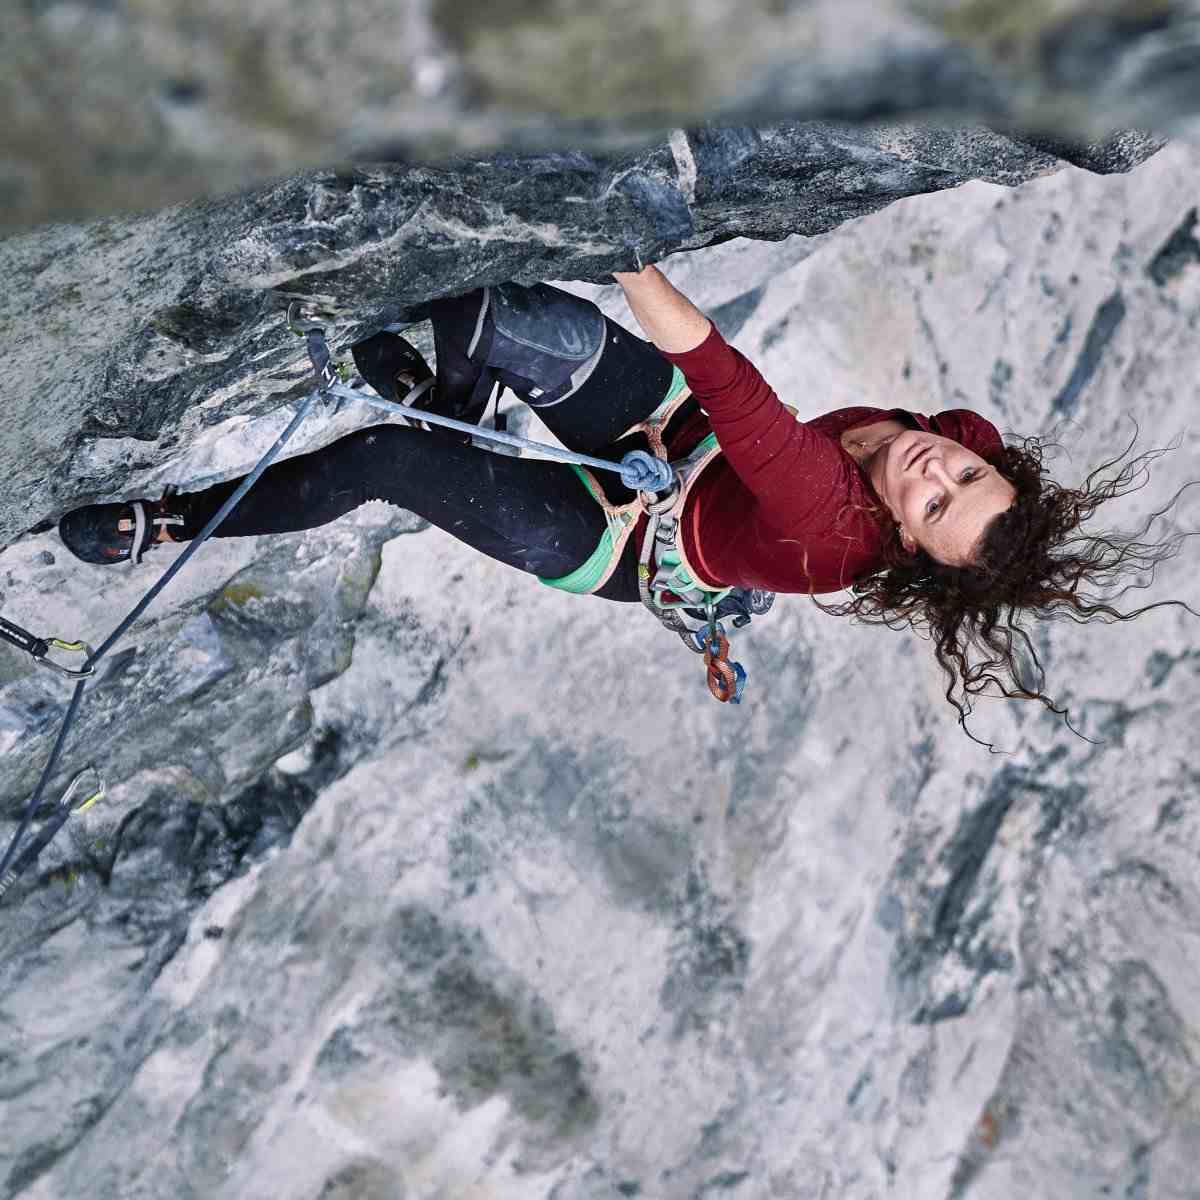 Female climber in red shirt with wild hair looking up on steeply overhanging rock.